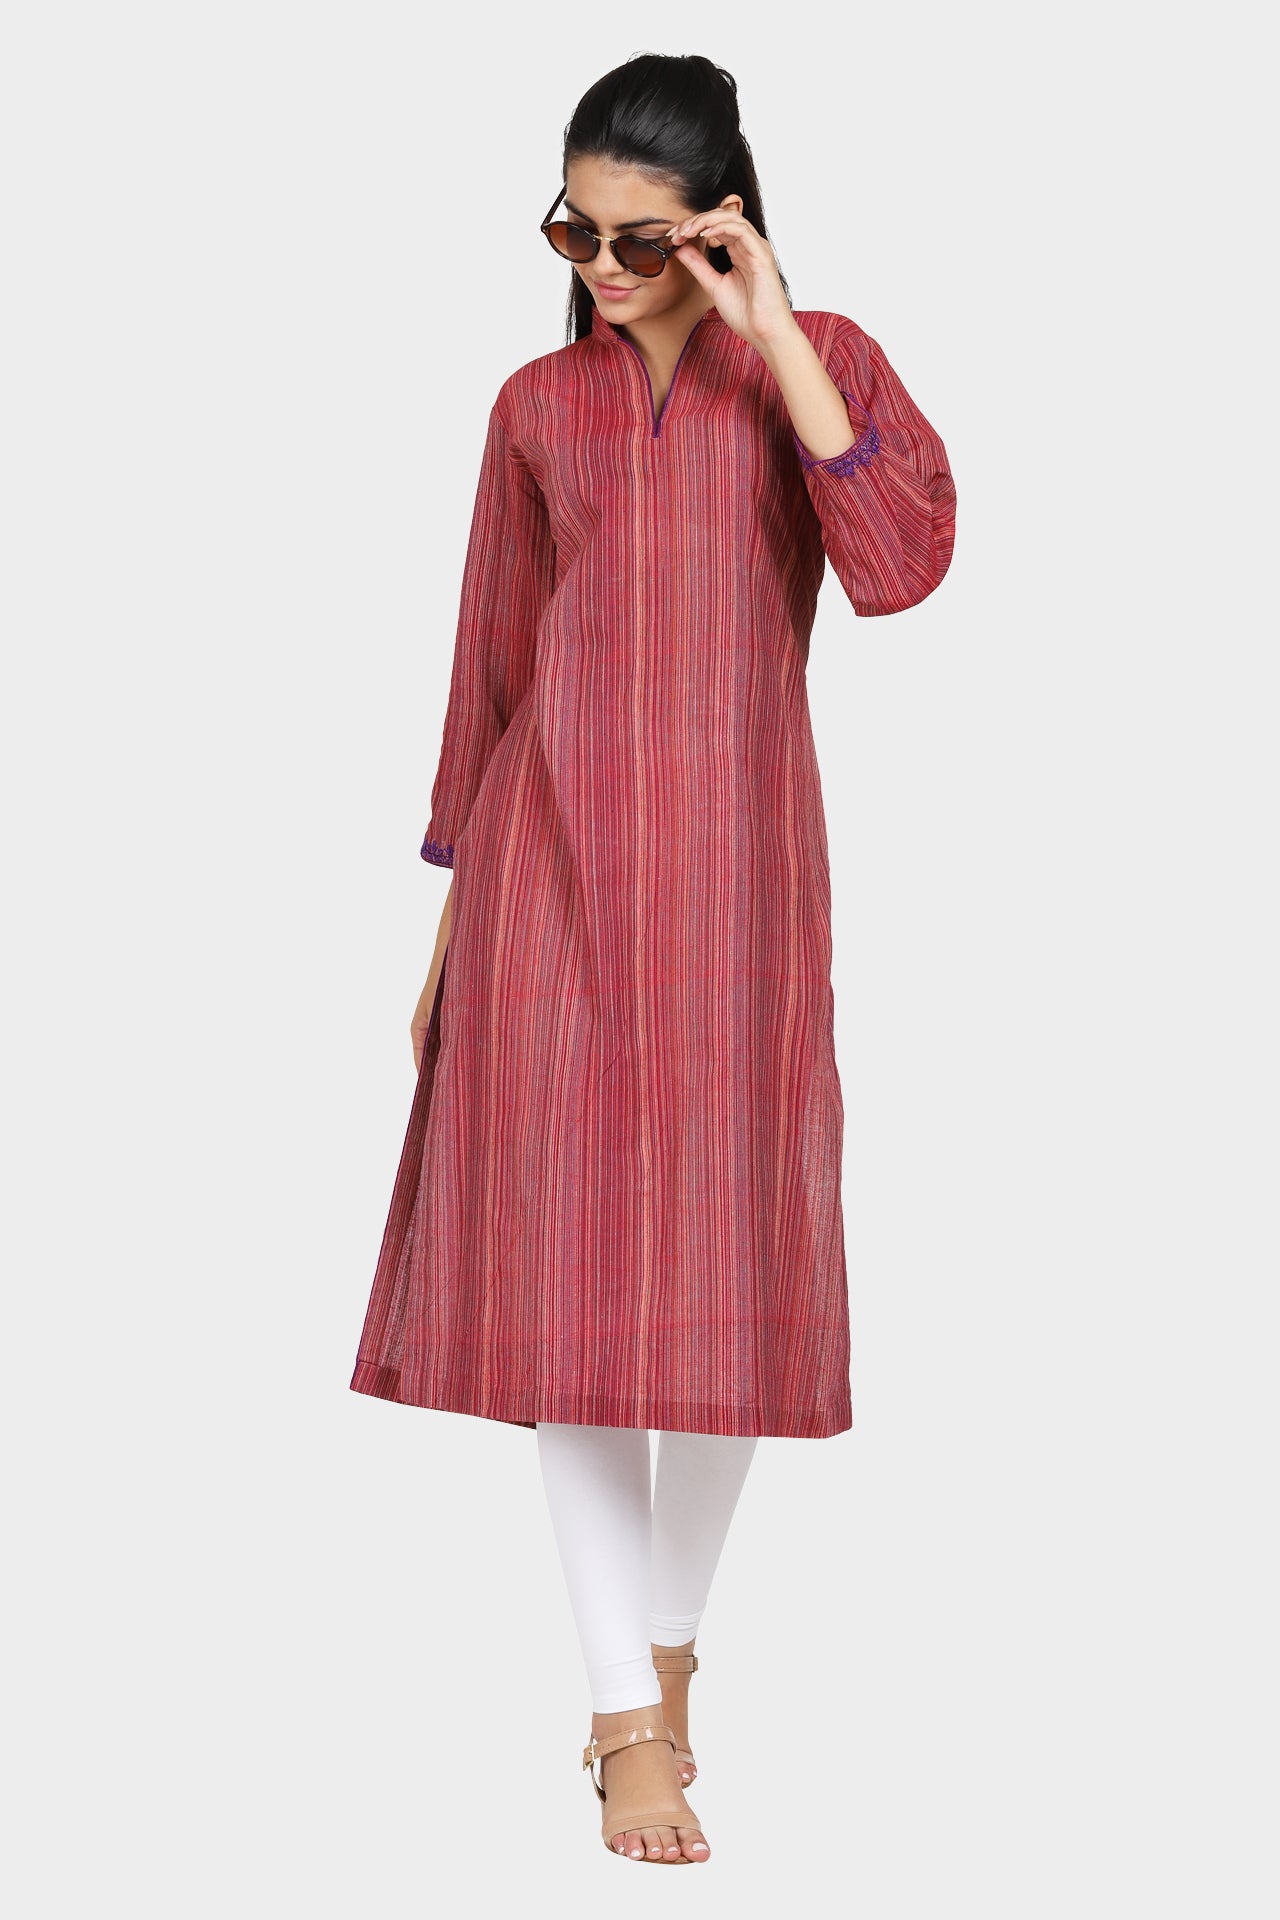 Maroon Abstract Pattern Cotton Kurta with Purple Embroidered Sleeves